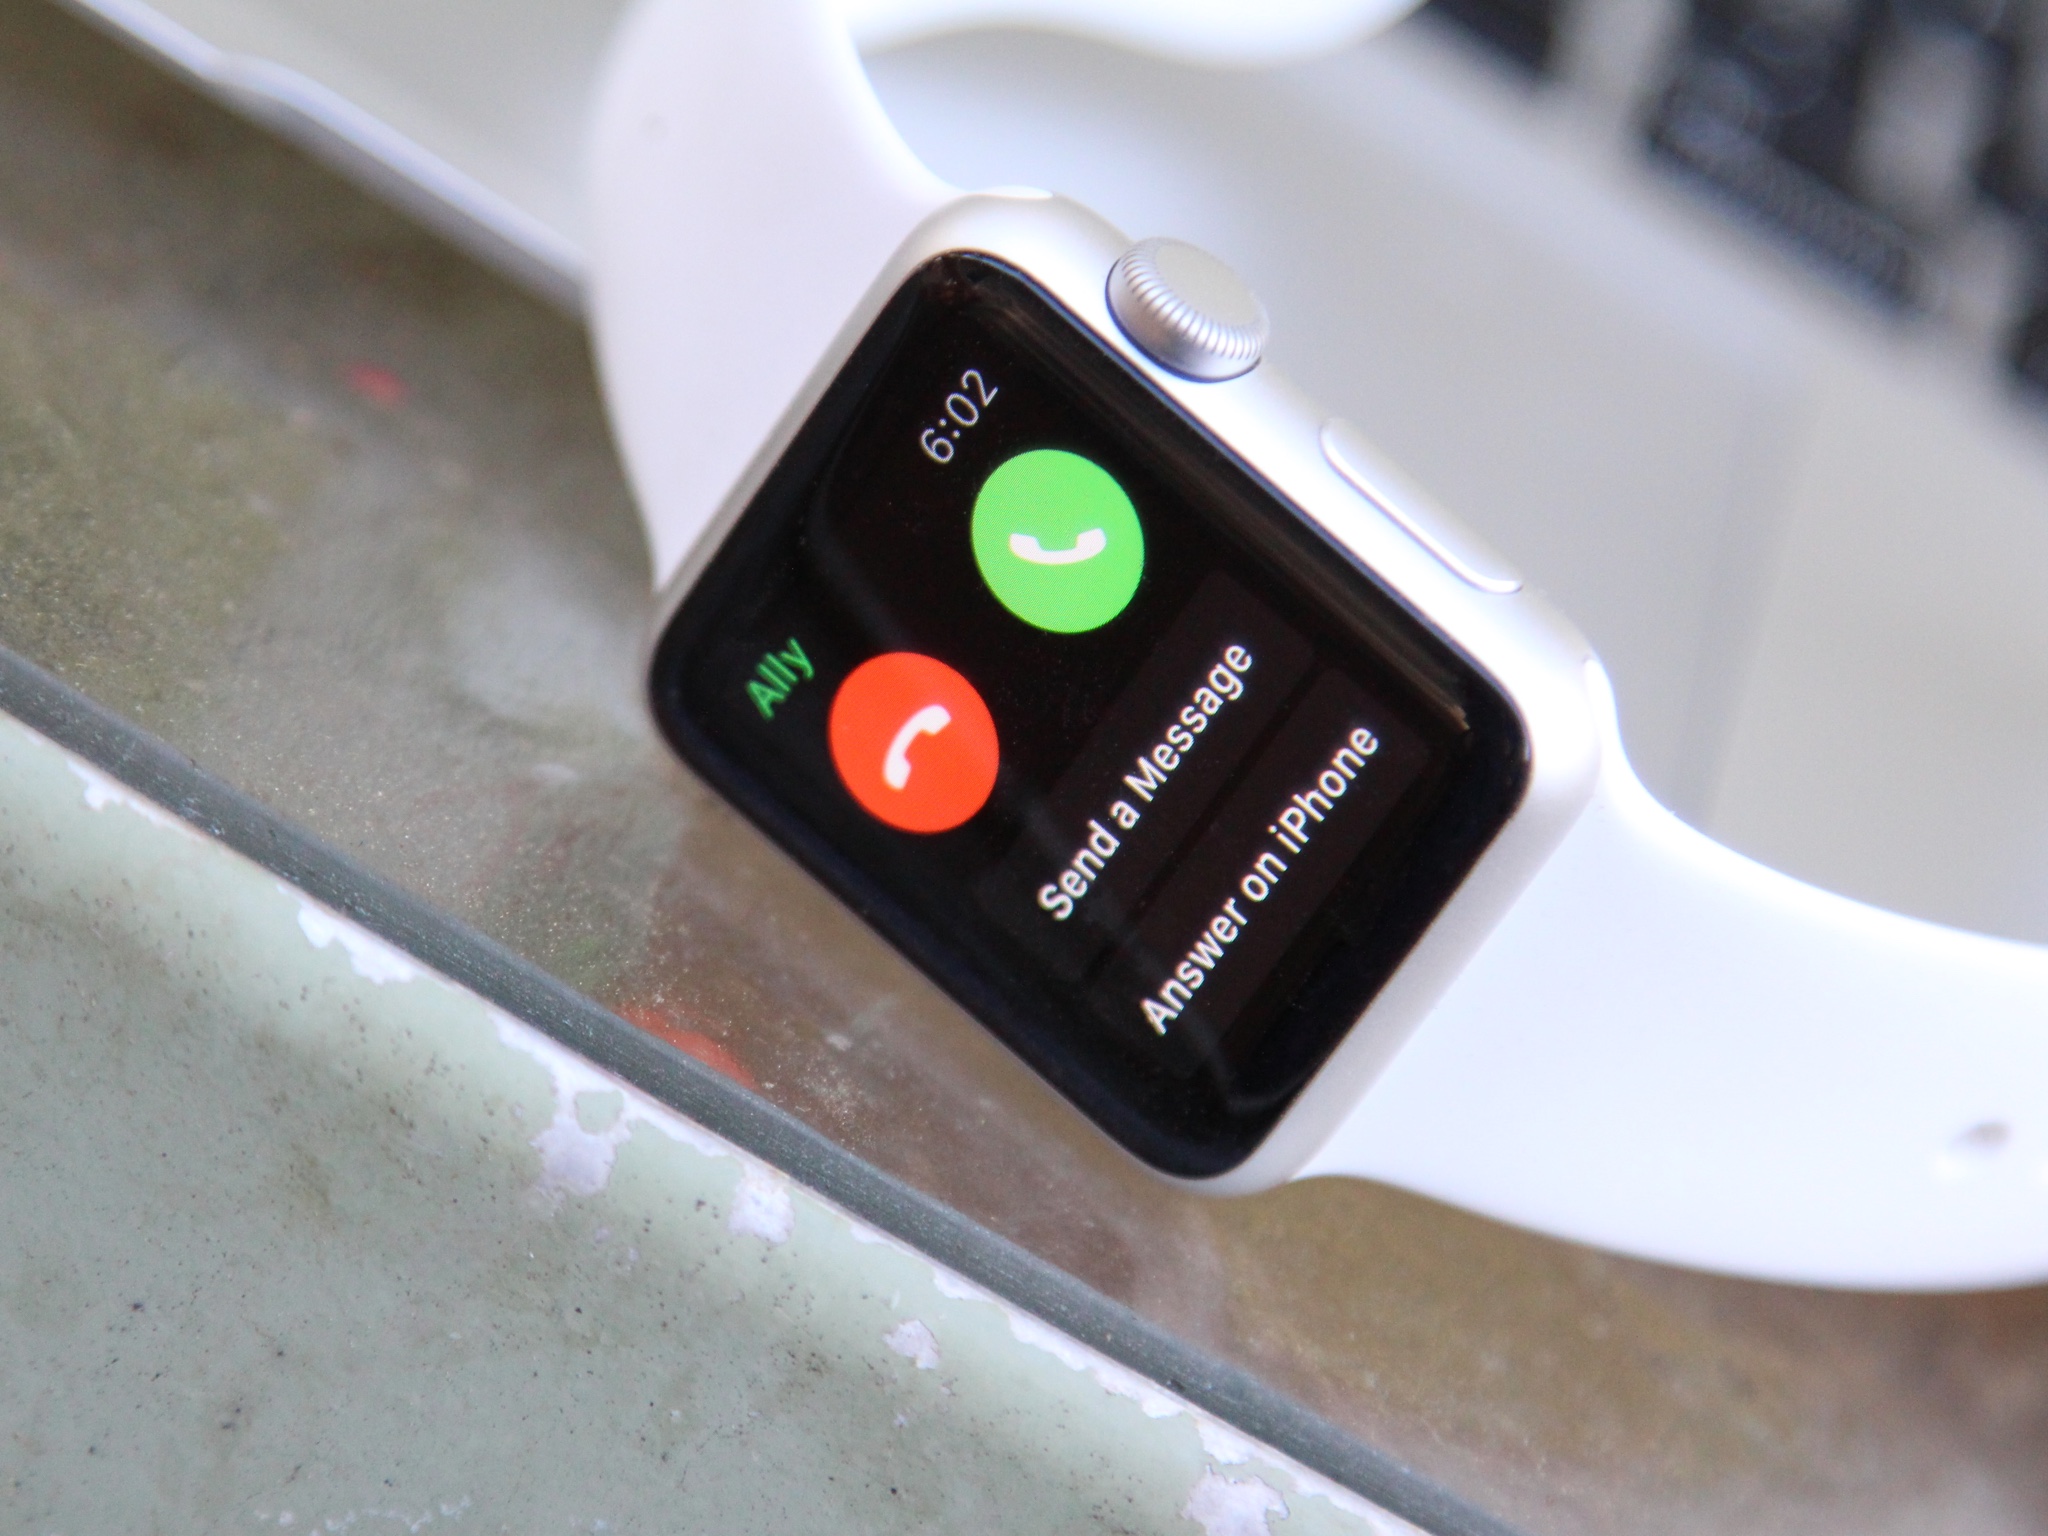 How to manage phone calls and voicemails with Apple Watch